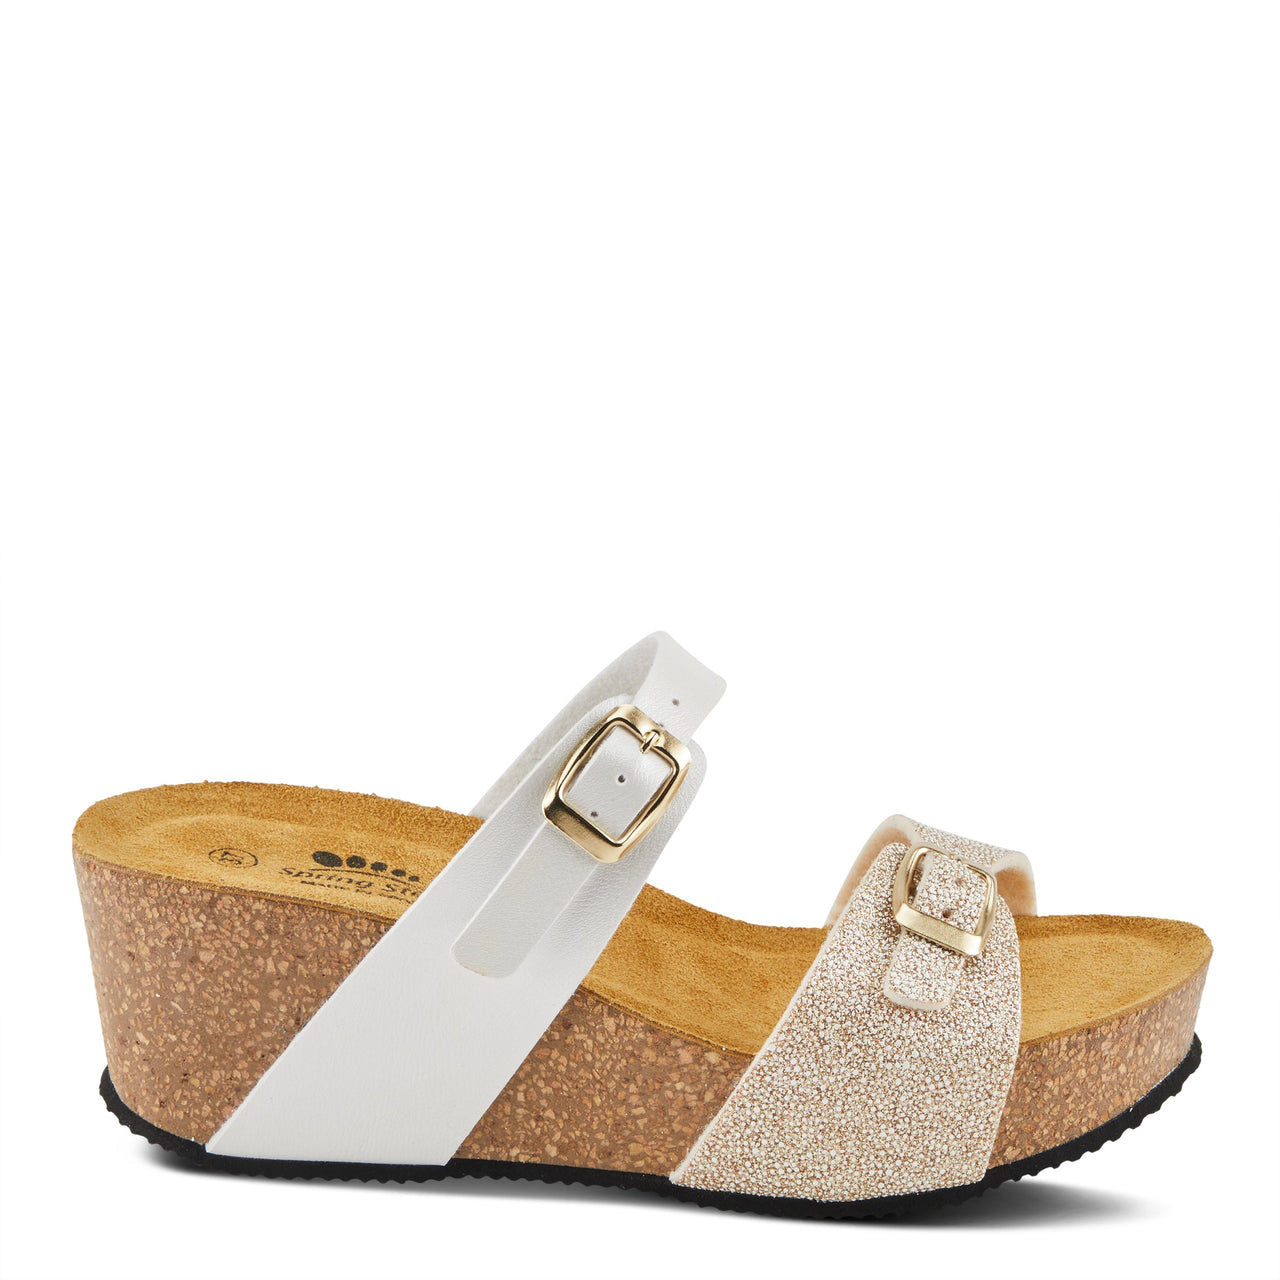 Trendy Spring Step Bynum Sandals crafted with premium quality leather and supportive low wedge heels